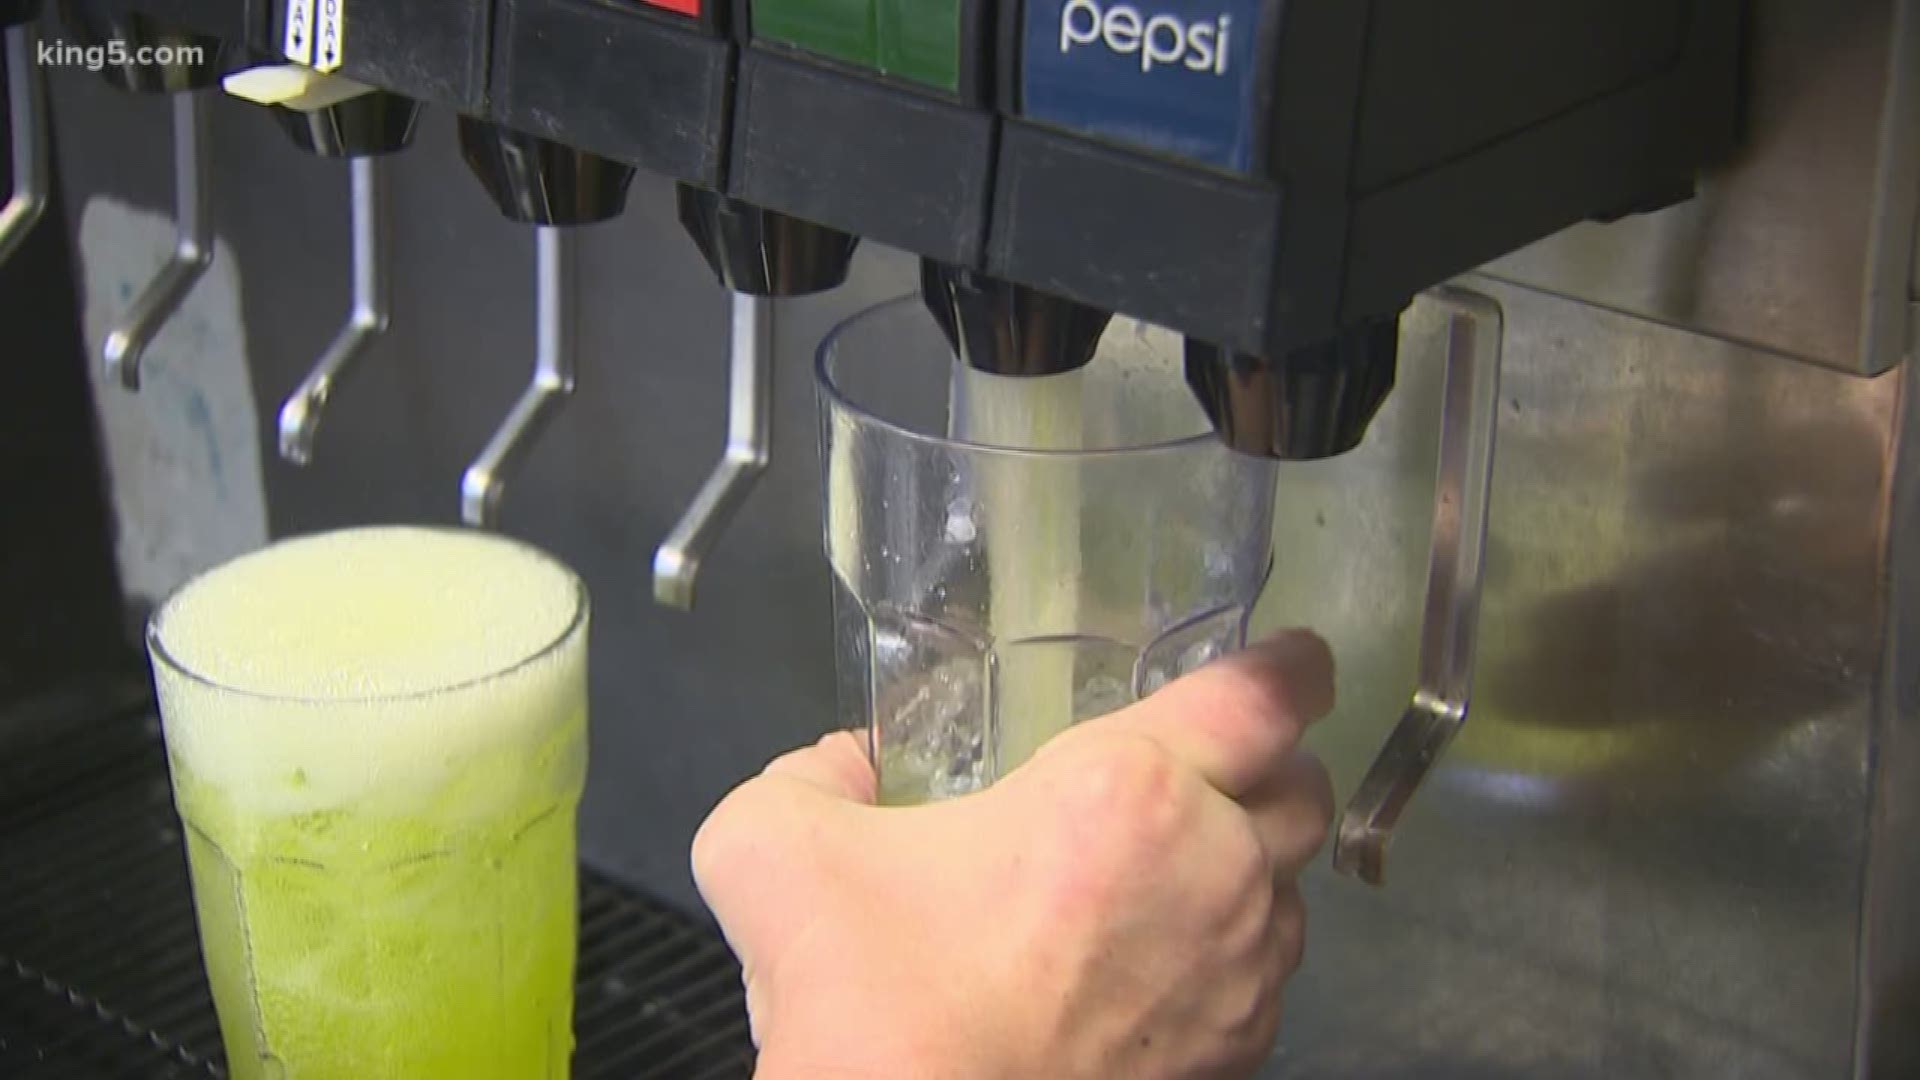 Senate Bill 6455 would require sugary drinks like sodas to be removed from kid menus in restaurants. Restaurants could still serve sugary drinks if requested.